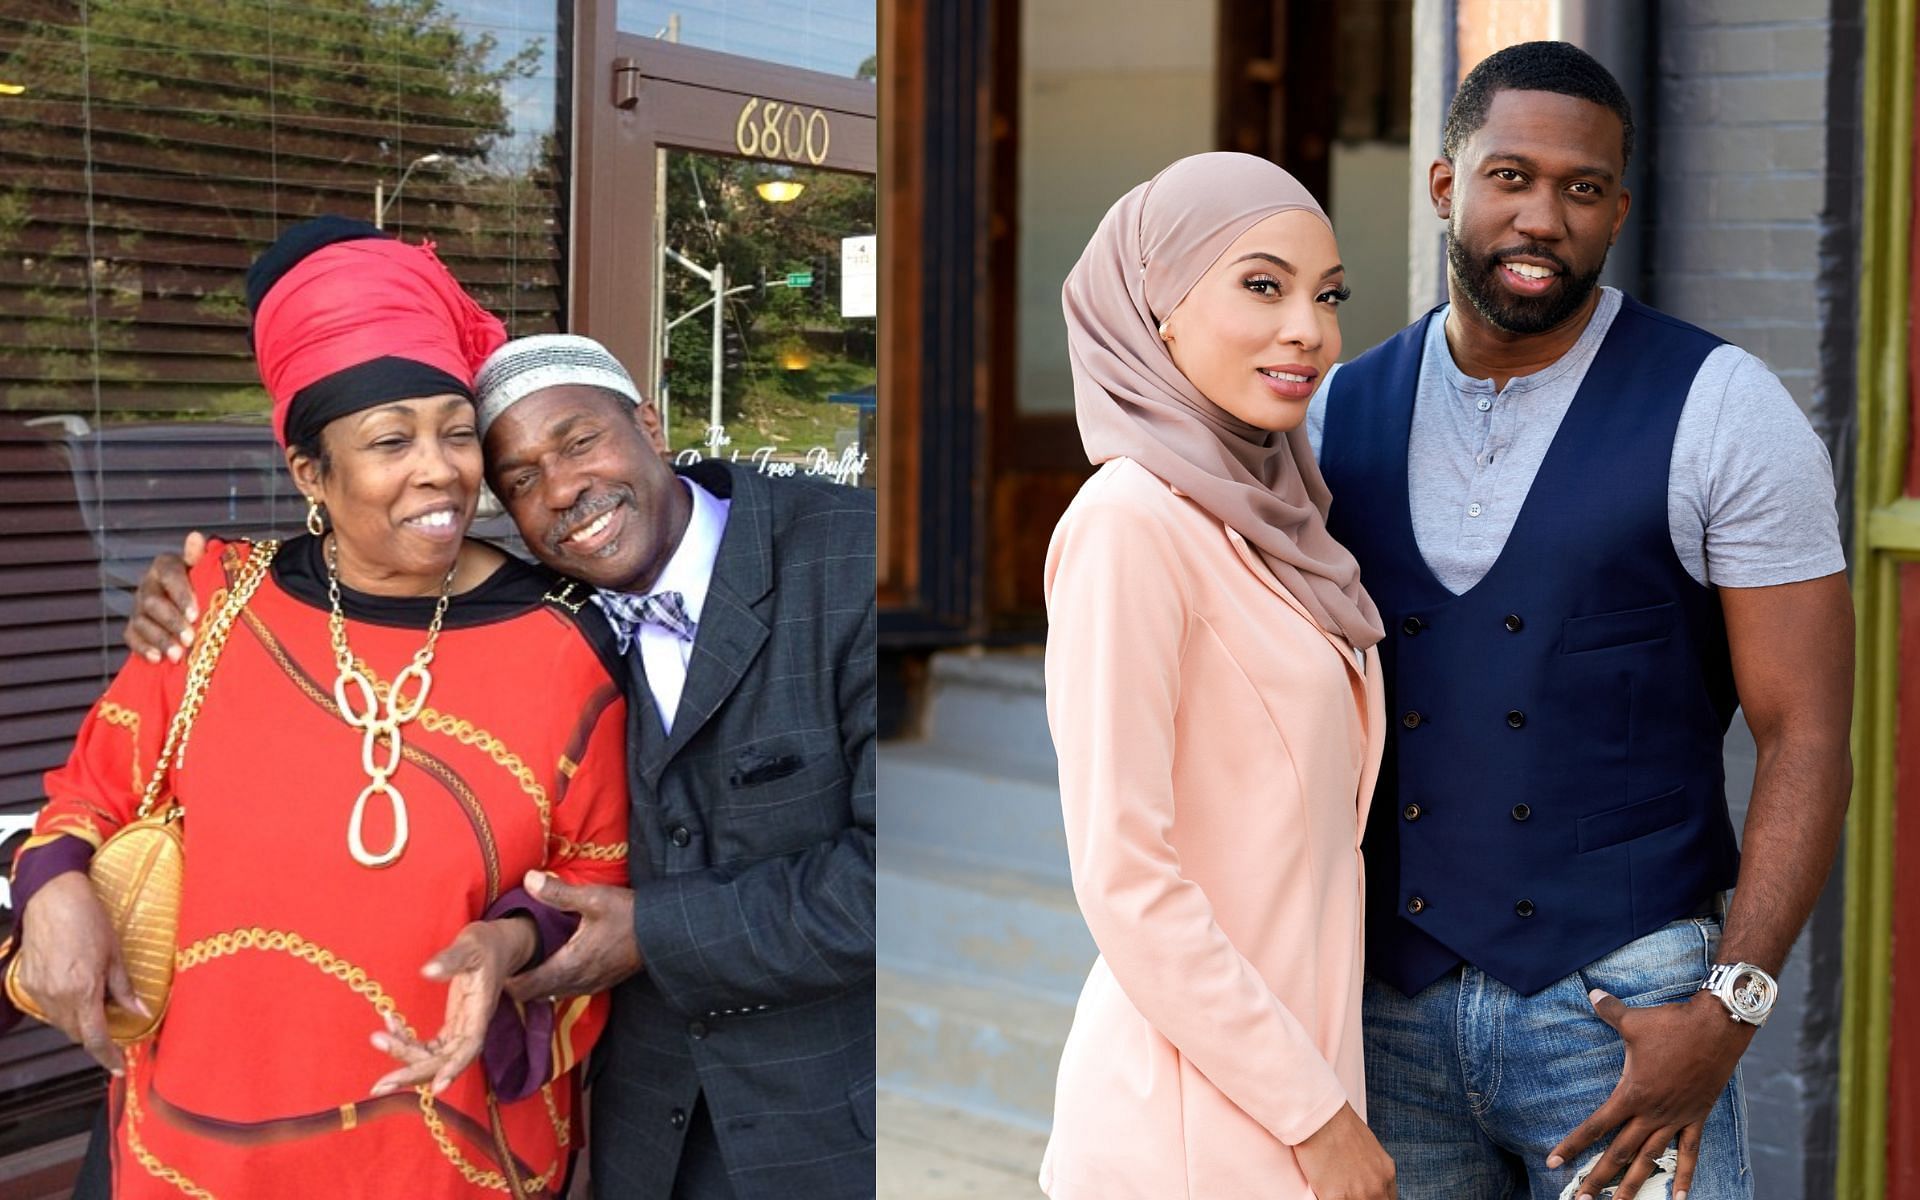 Shaeeda asks Bilal&#039;s mother to give her relationship advice (Images via bilalhazziez/Instagram and TLC)